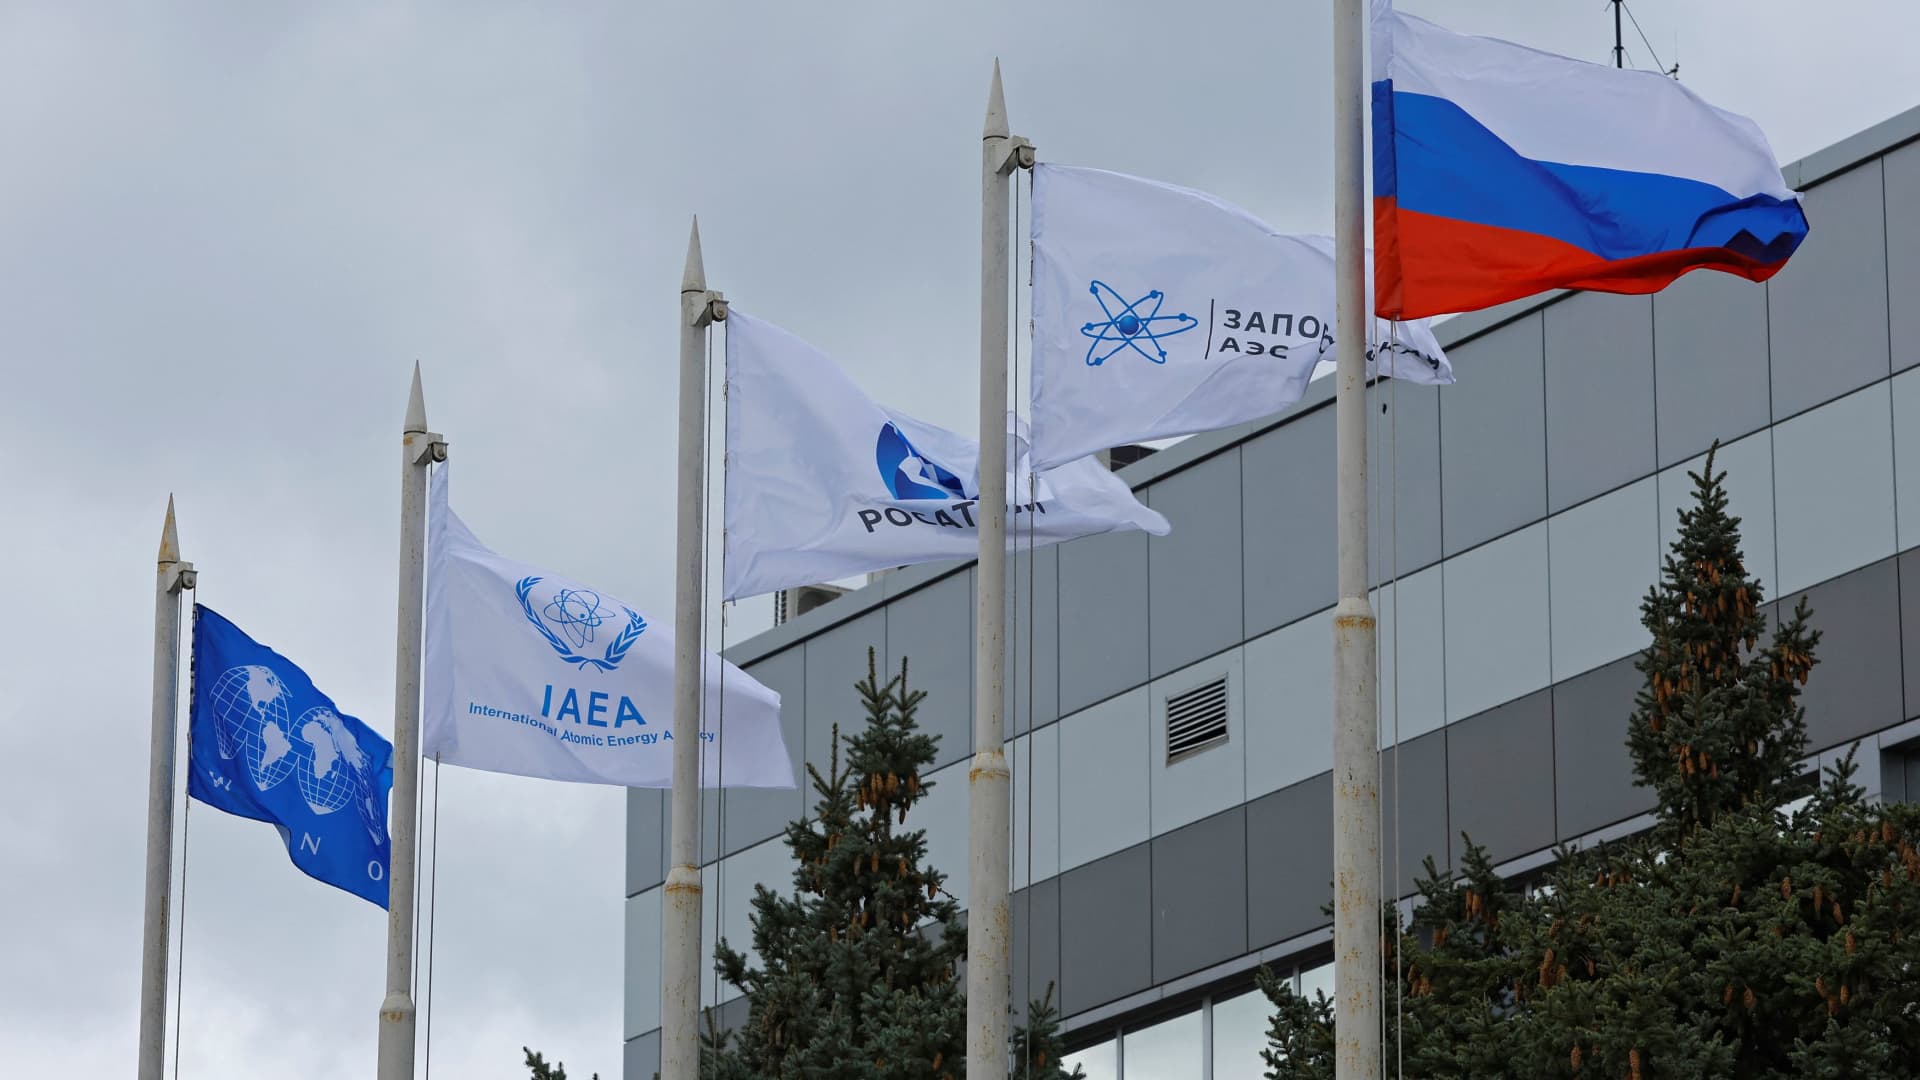 Flags fly in front of the Zaporizhzhia Nuclear Power Plant in the course of Russia-Ukraine conflict outside Enerhodar in the Zaporizhzhia region, Russian-controlled Ukraine, March 29, 2023. 